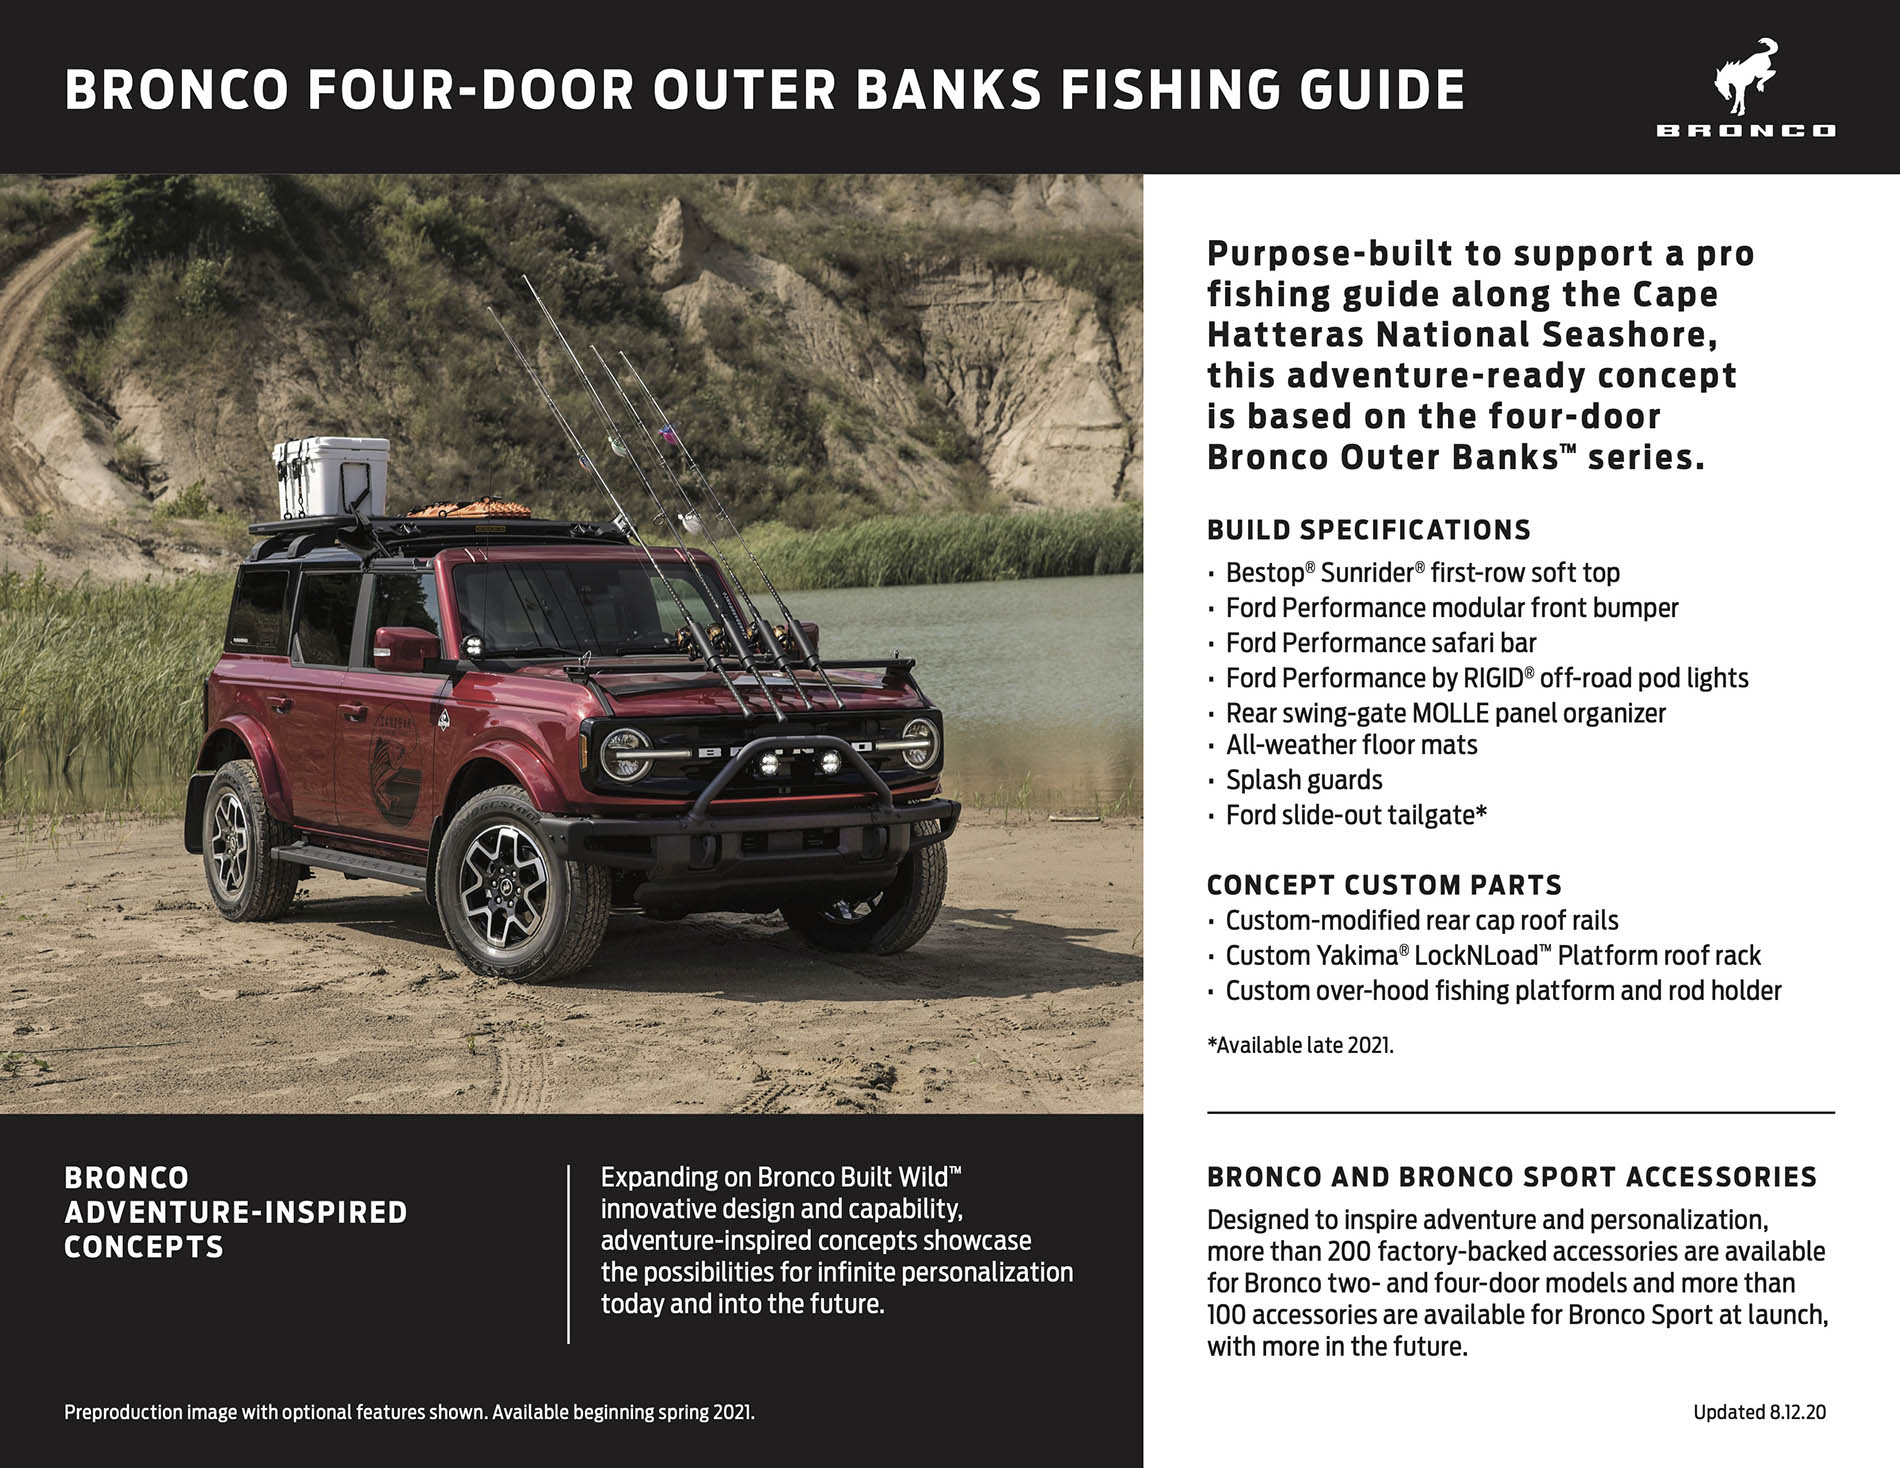 Ford Bronco Introducing the Bronco Four-Door Outer Banks Fishing Guide (Accessories) Concept 2021 Bronco Four Door Outer Banks Fishing Guide Concept Fact Sheet